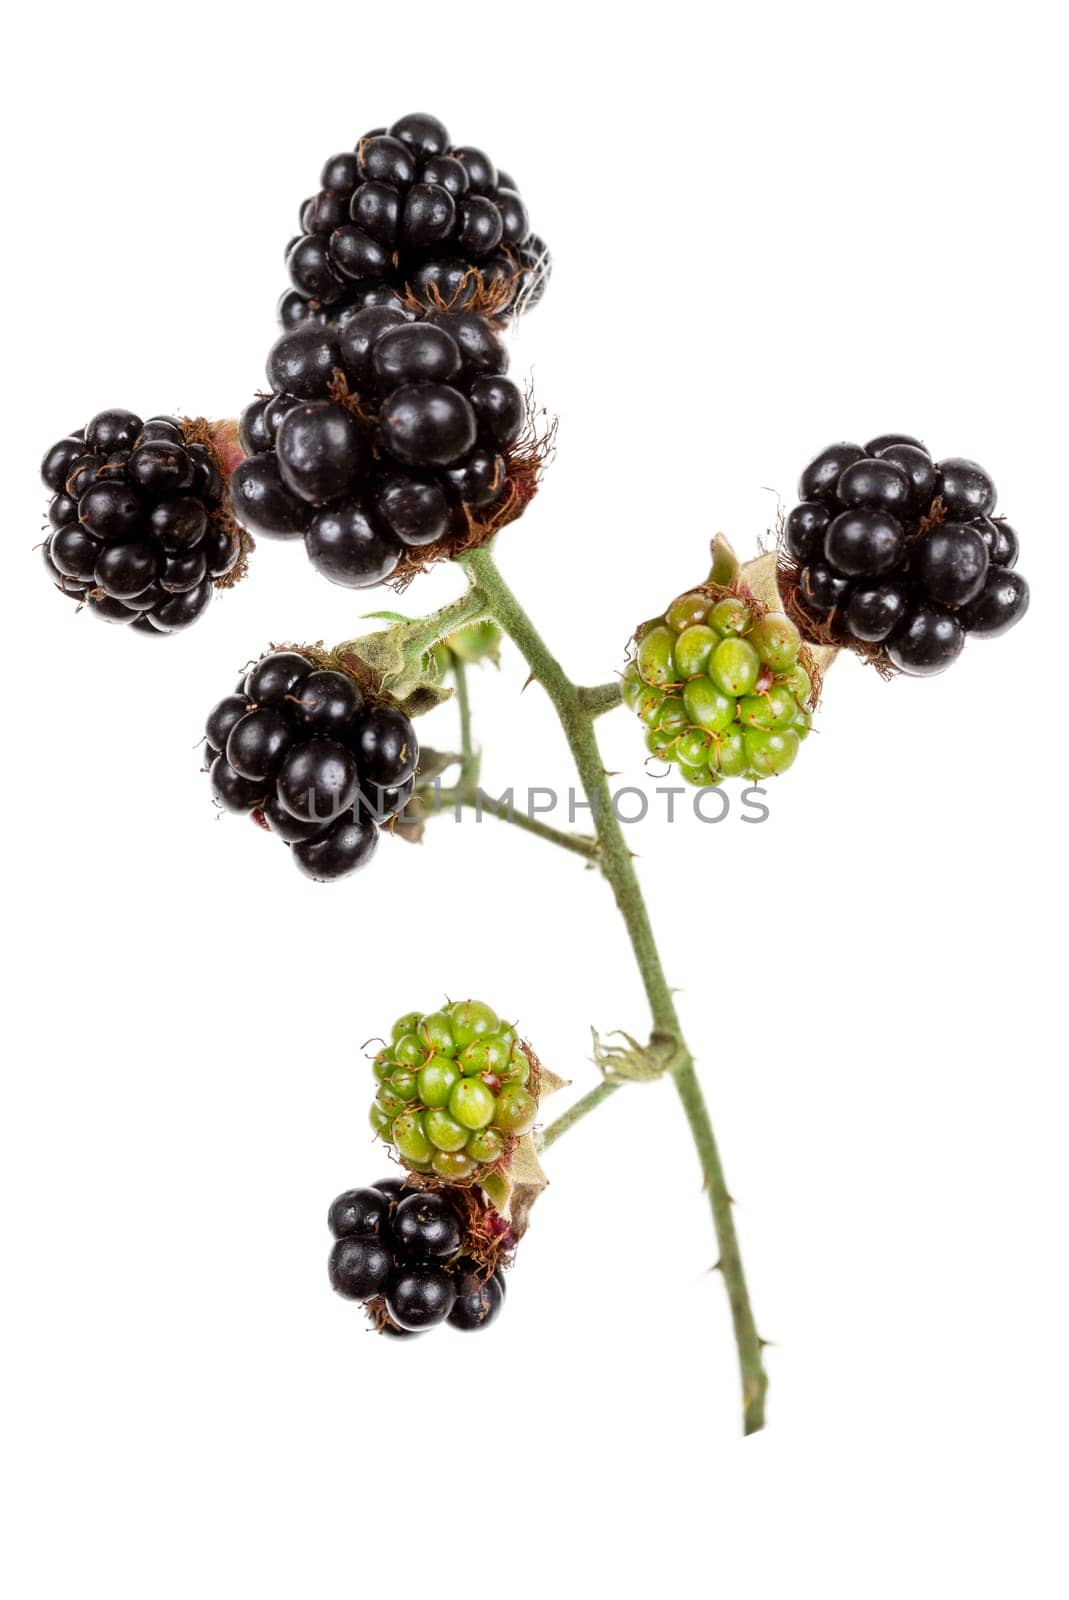 Fresh blackberries in the garden. A bunch of ripe blackberry fruits on a branch with green leaves. natural background. by JPC-PROD